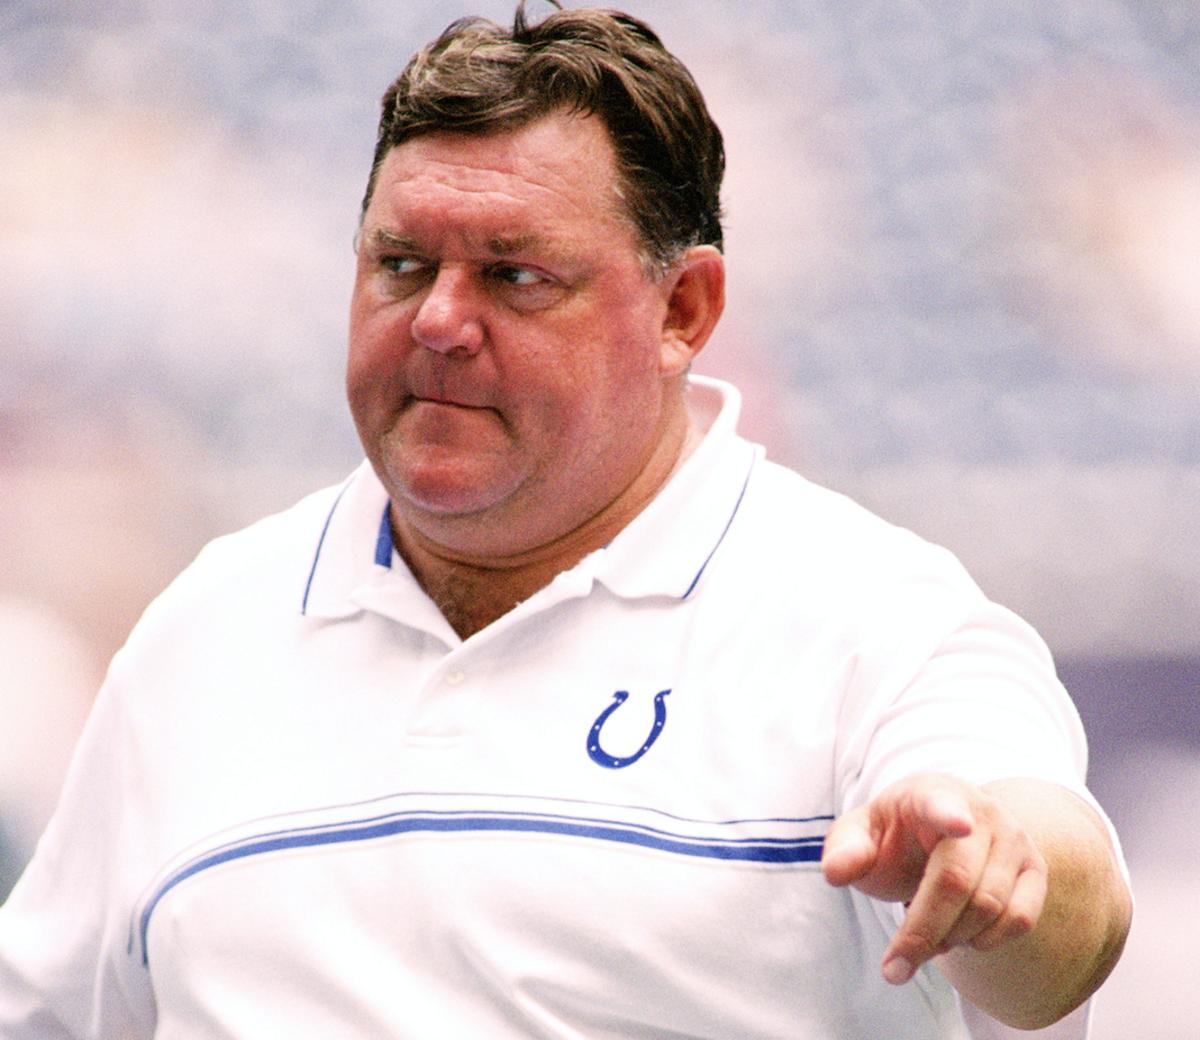 Seven pass rushers coached by defensive line coach John Teerlinck accumulated 100 career NFL sacks. Teerlinck, who was with the Indianapolis Colts from 2002 to 2012, passed away Sunday night.